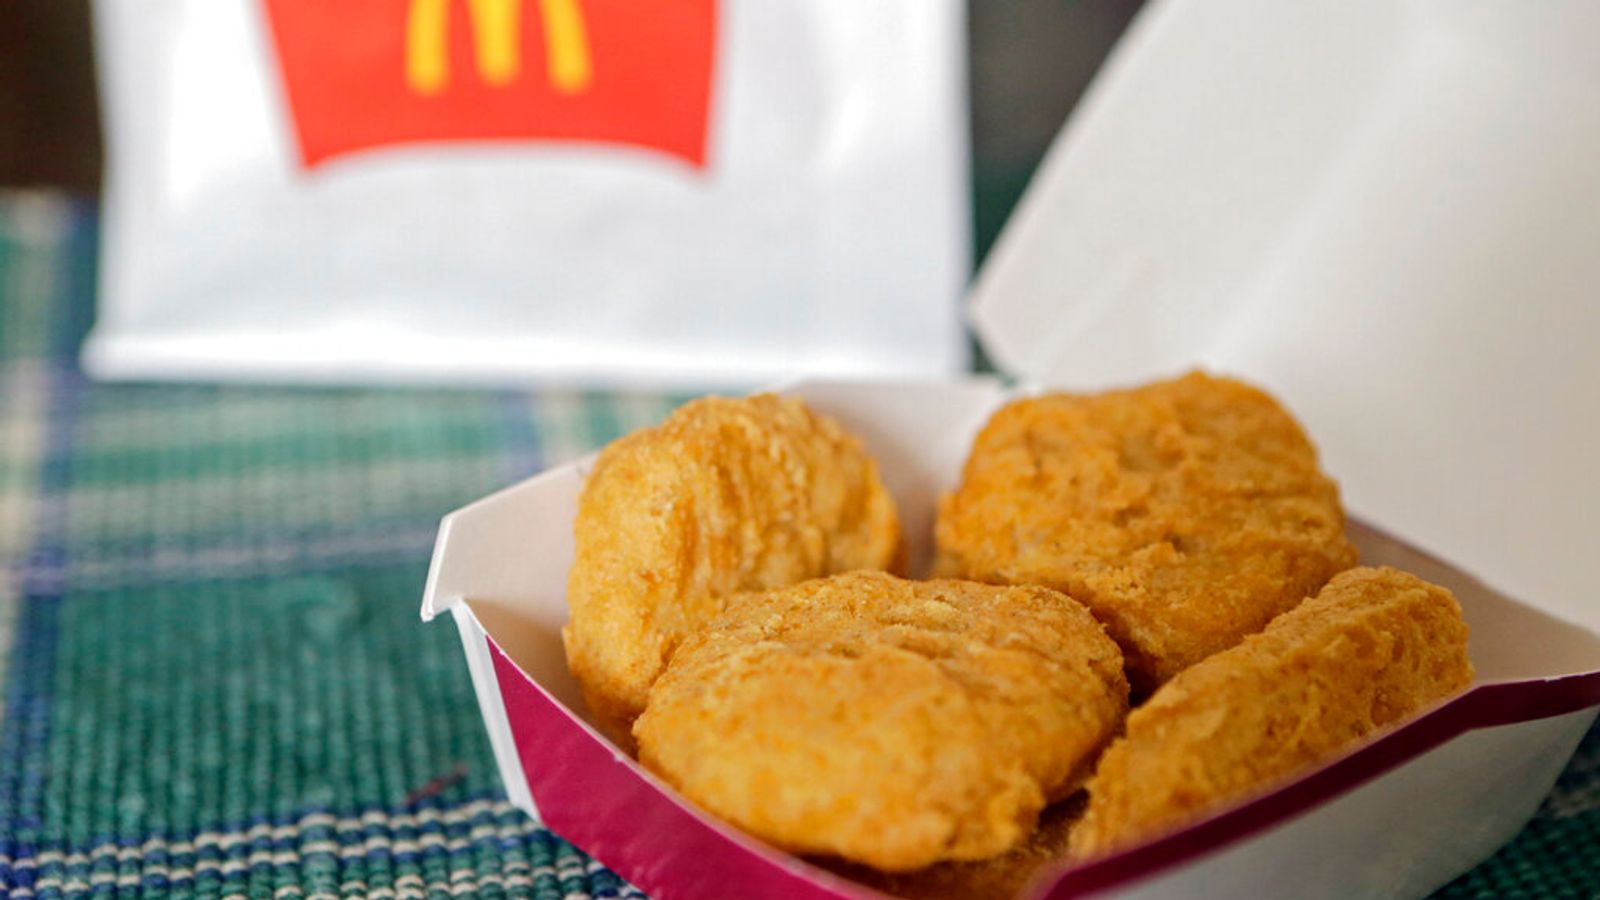 Mother wins legal battle with McDonald's after daughter suffers burns from chicken nugget